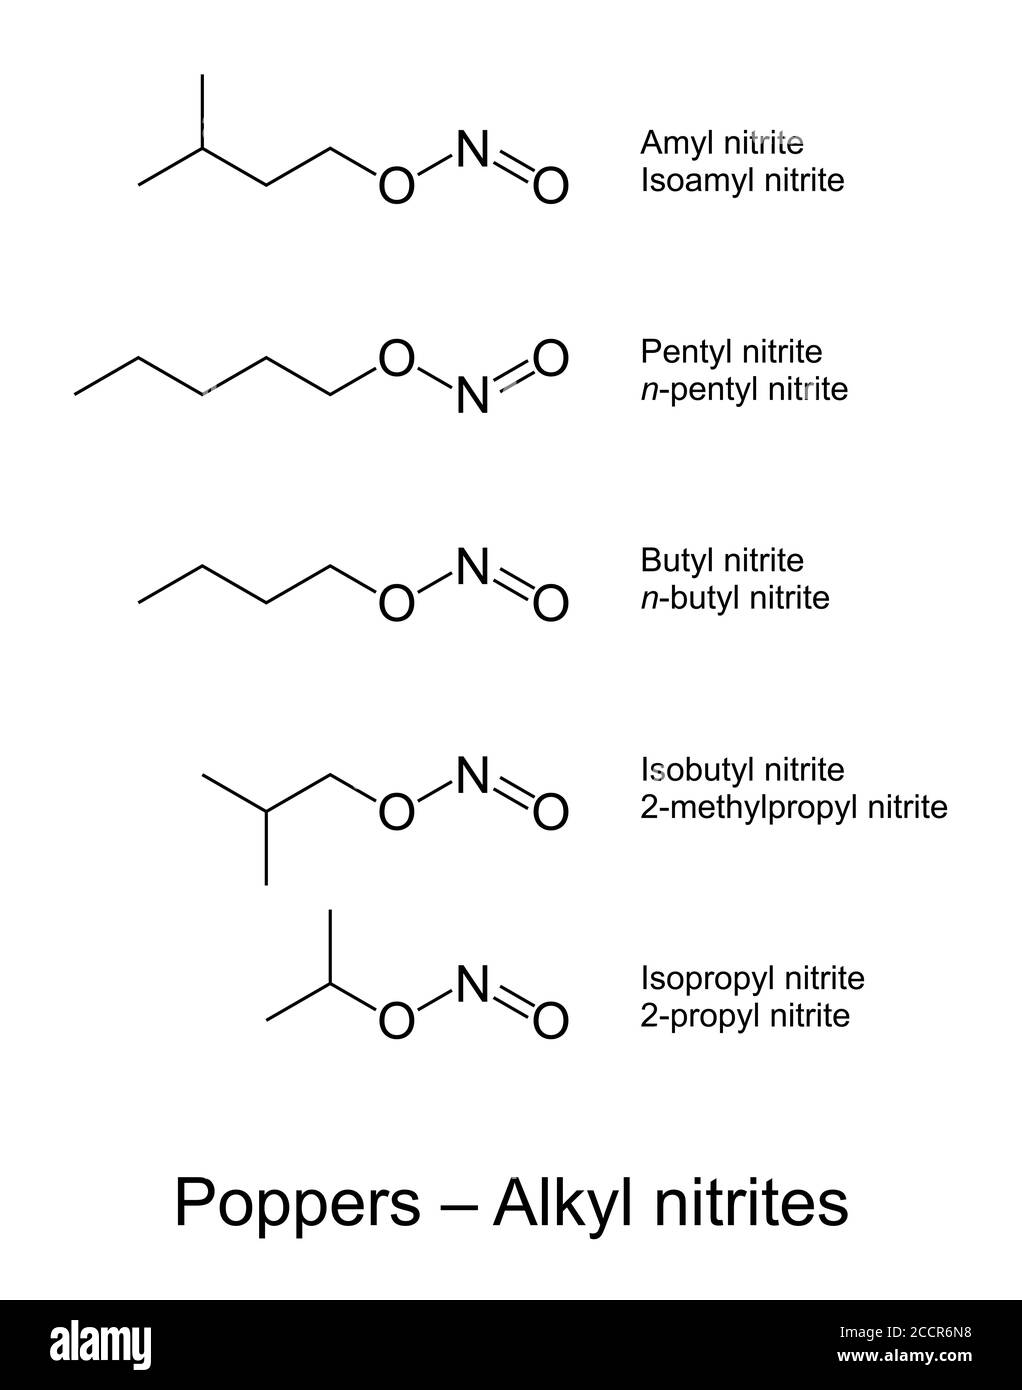 Poppers, alkyl nitrites chemical structures. Slang term for chemical compounds, used especially in the gay scene as recreational drugs. Stock Photo